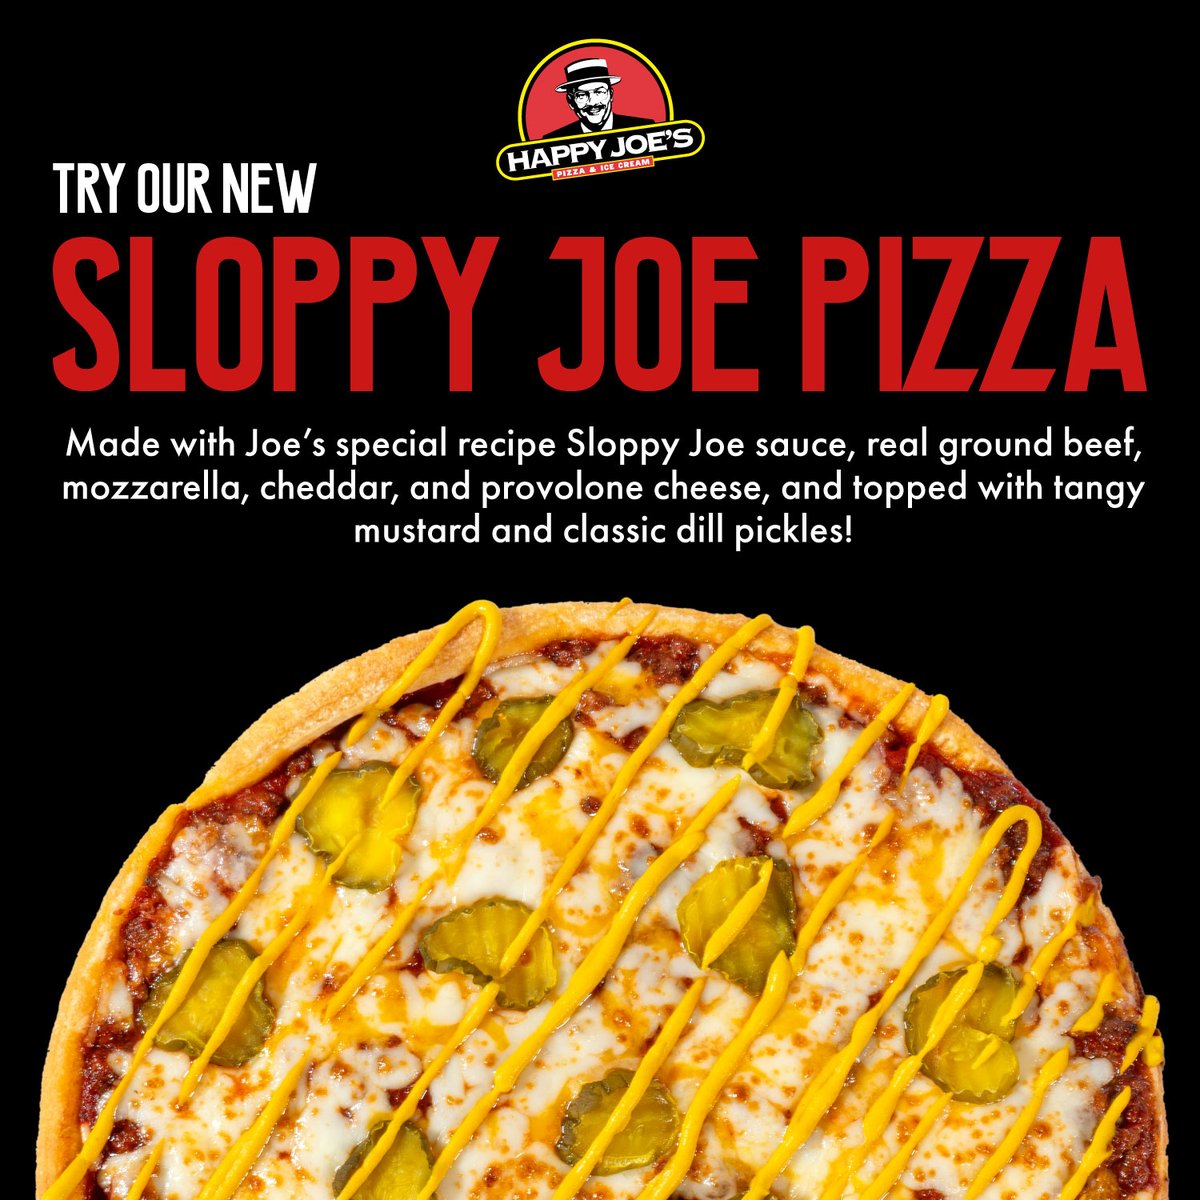 Have you tried our Sloppy Joe Pizza yet? Featuring our hearty Pan-Style crust, 100% real ground beef, special sloppy joe sauce, a blend of three delicious cheeses, classic dill pickles, and yellow mustard, it's a pizza that's got everybody talking about it!